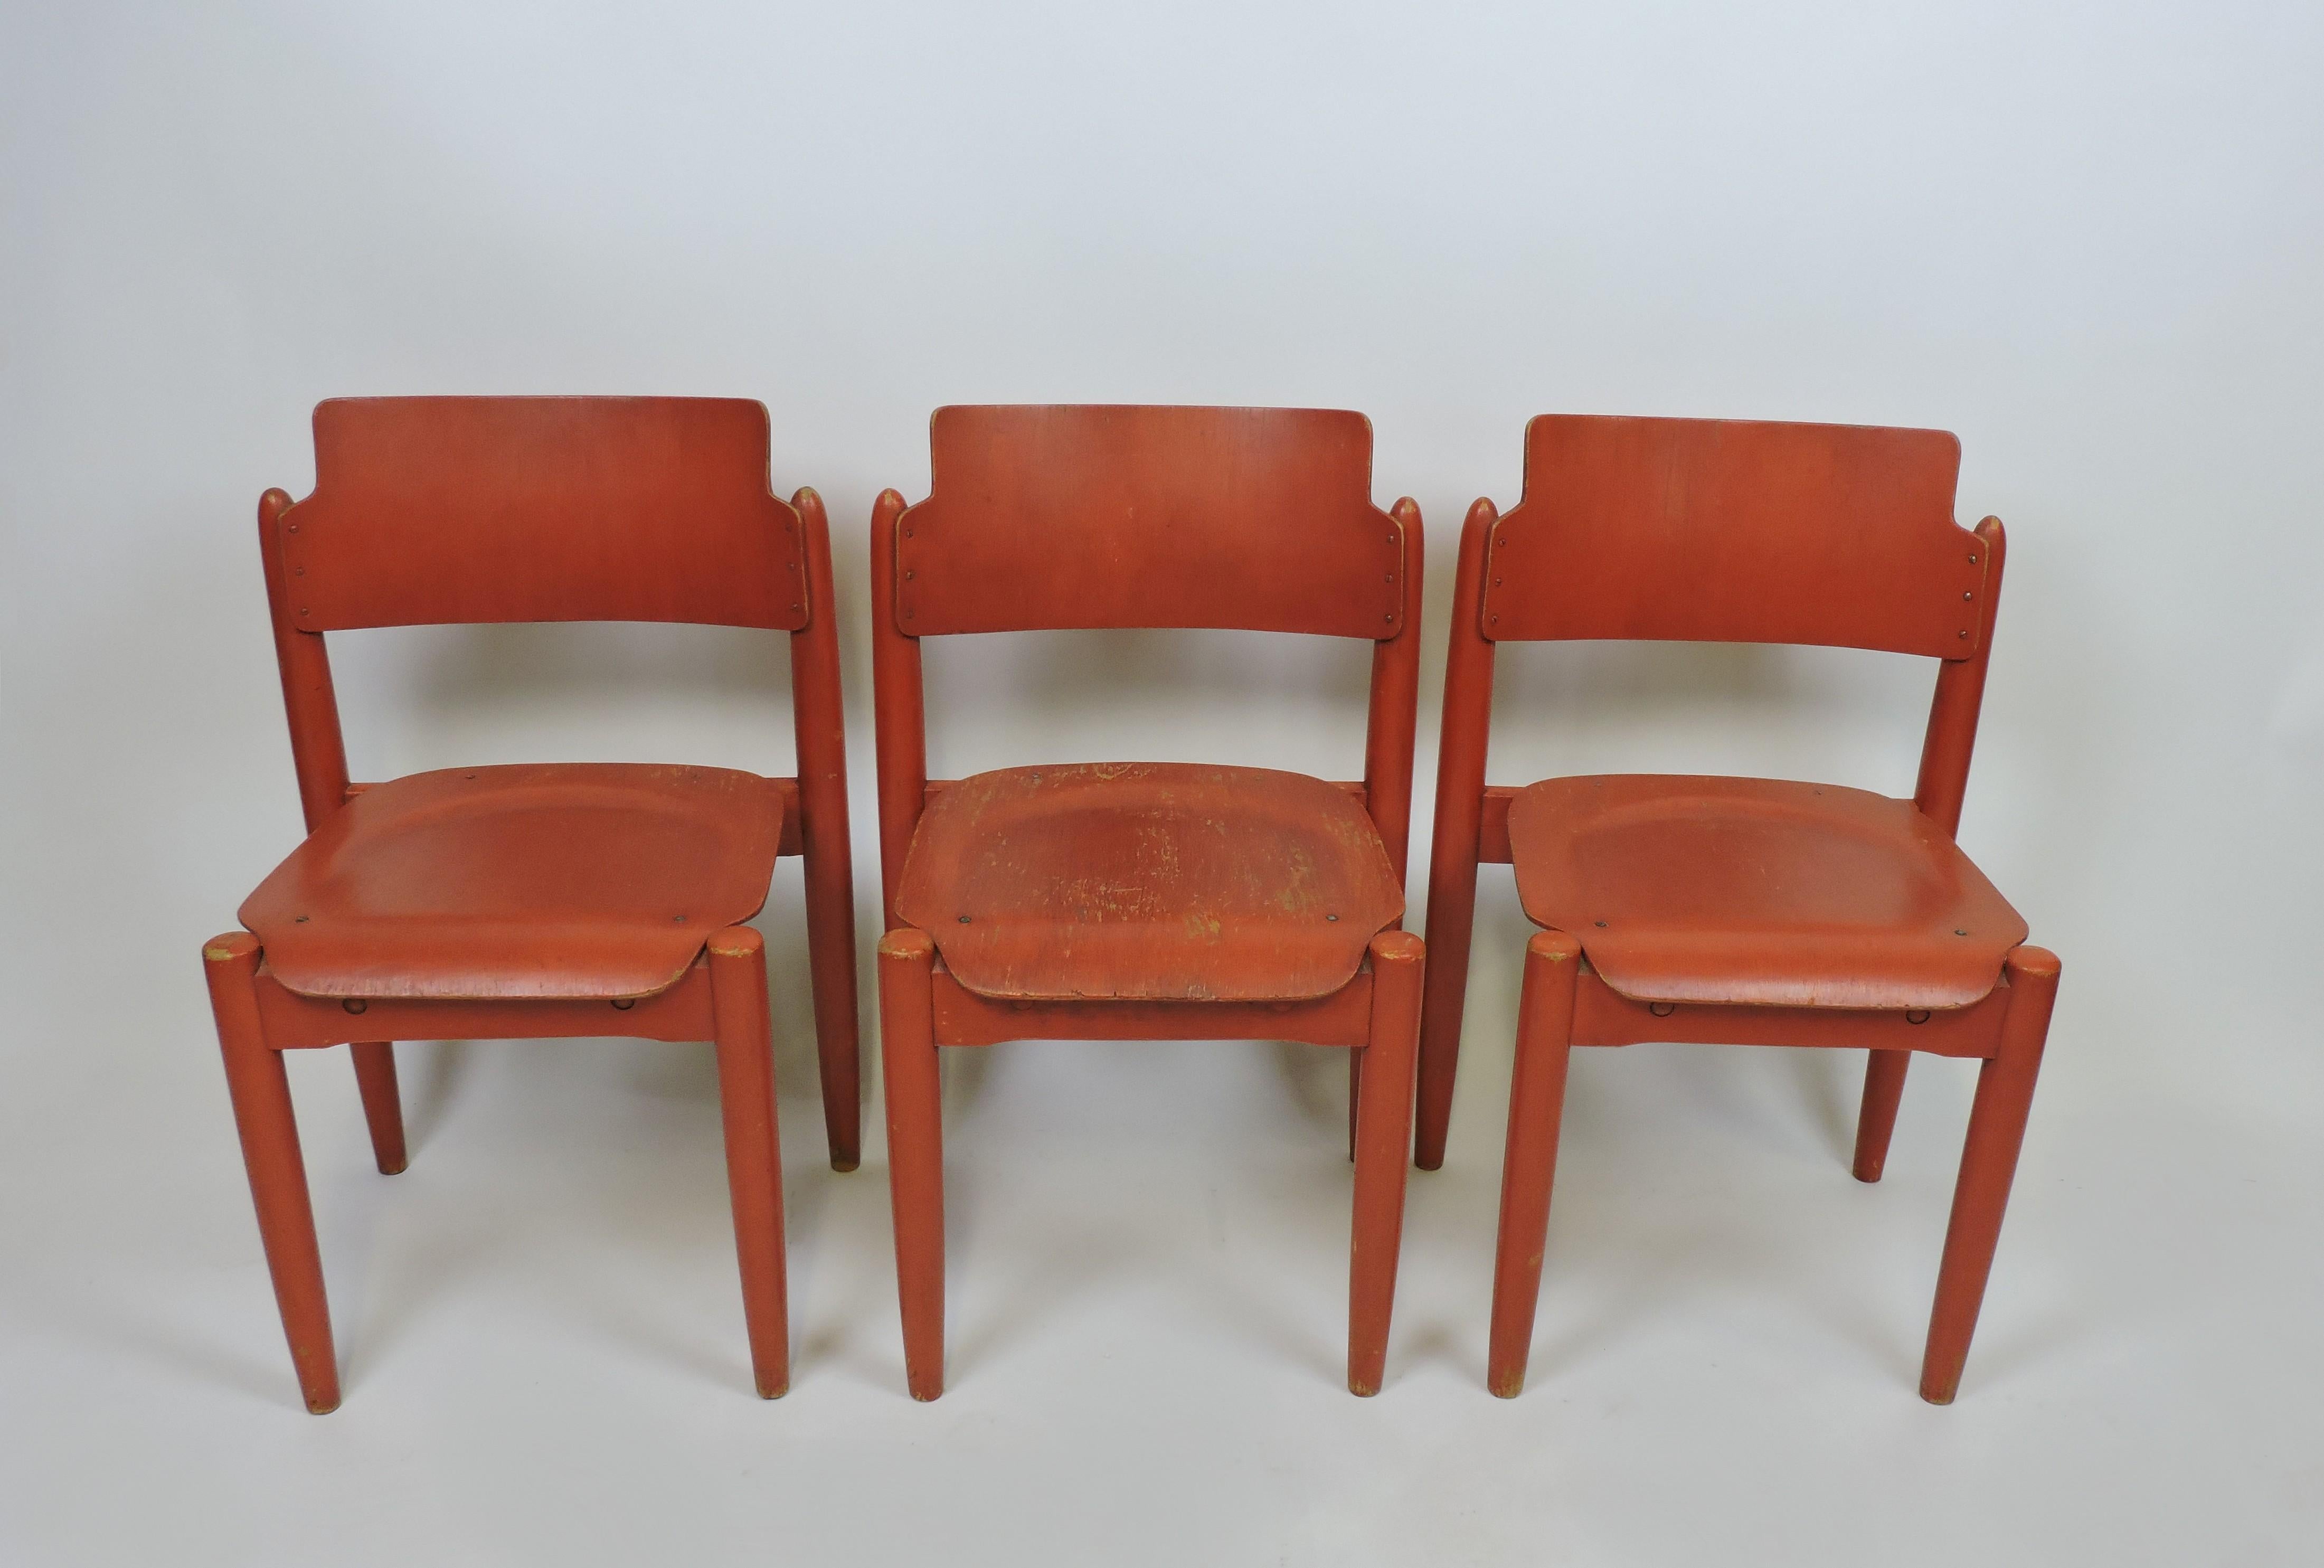 Set of 3 rare stackable Wilman chairs designed in 1956 by renowned Finnish designer, Ilmari Tapiovaara, and manufactured in Finland by Wilhelm Schauman Fanerfabrik. 
These innovative chairs are made with a bent plywood seat and back, and have nice